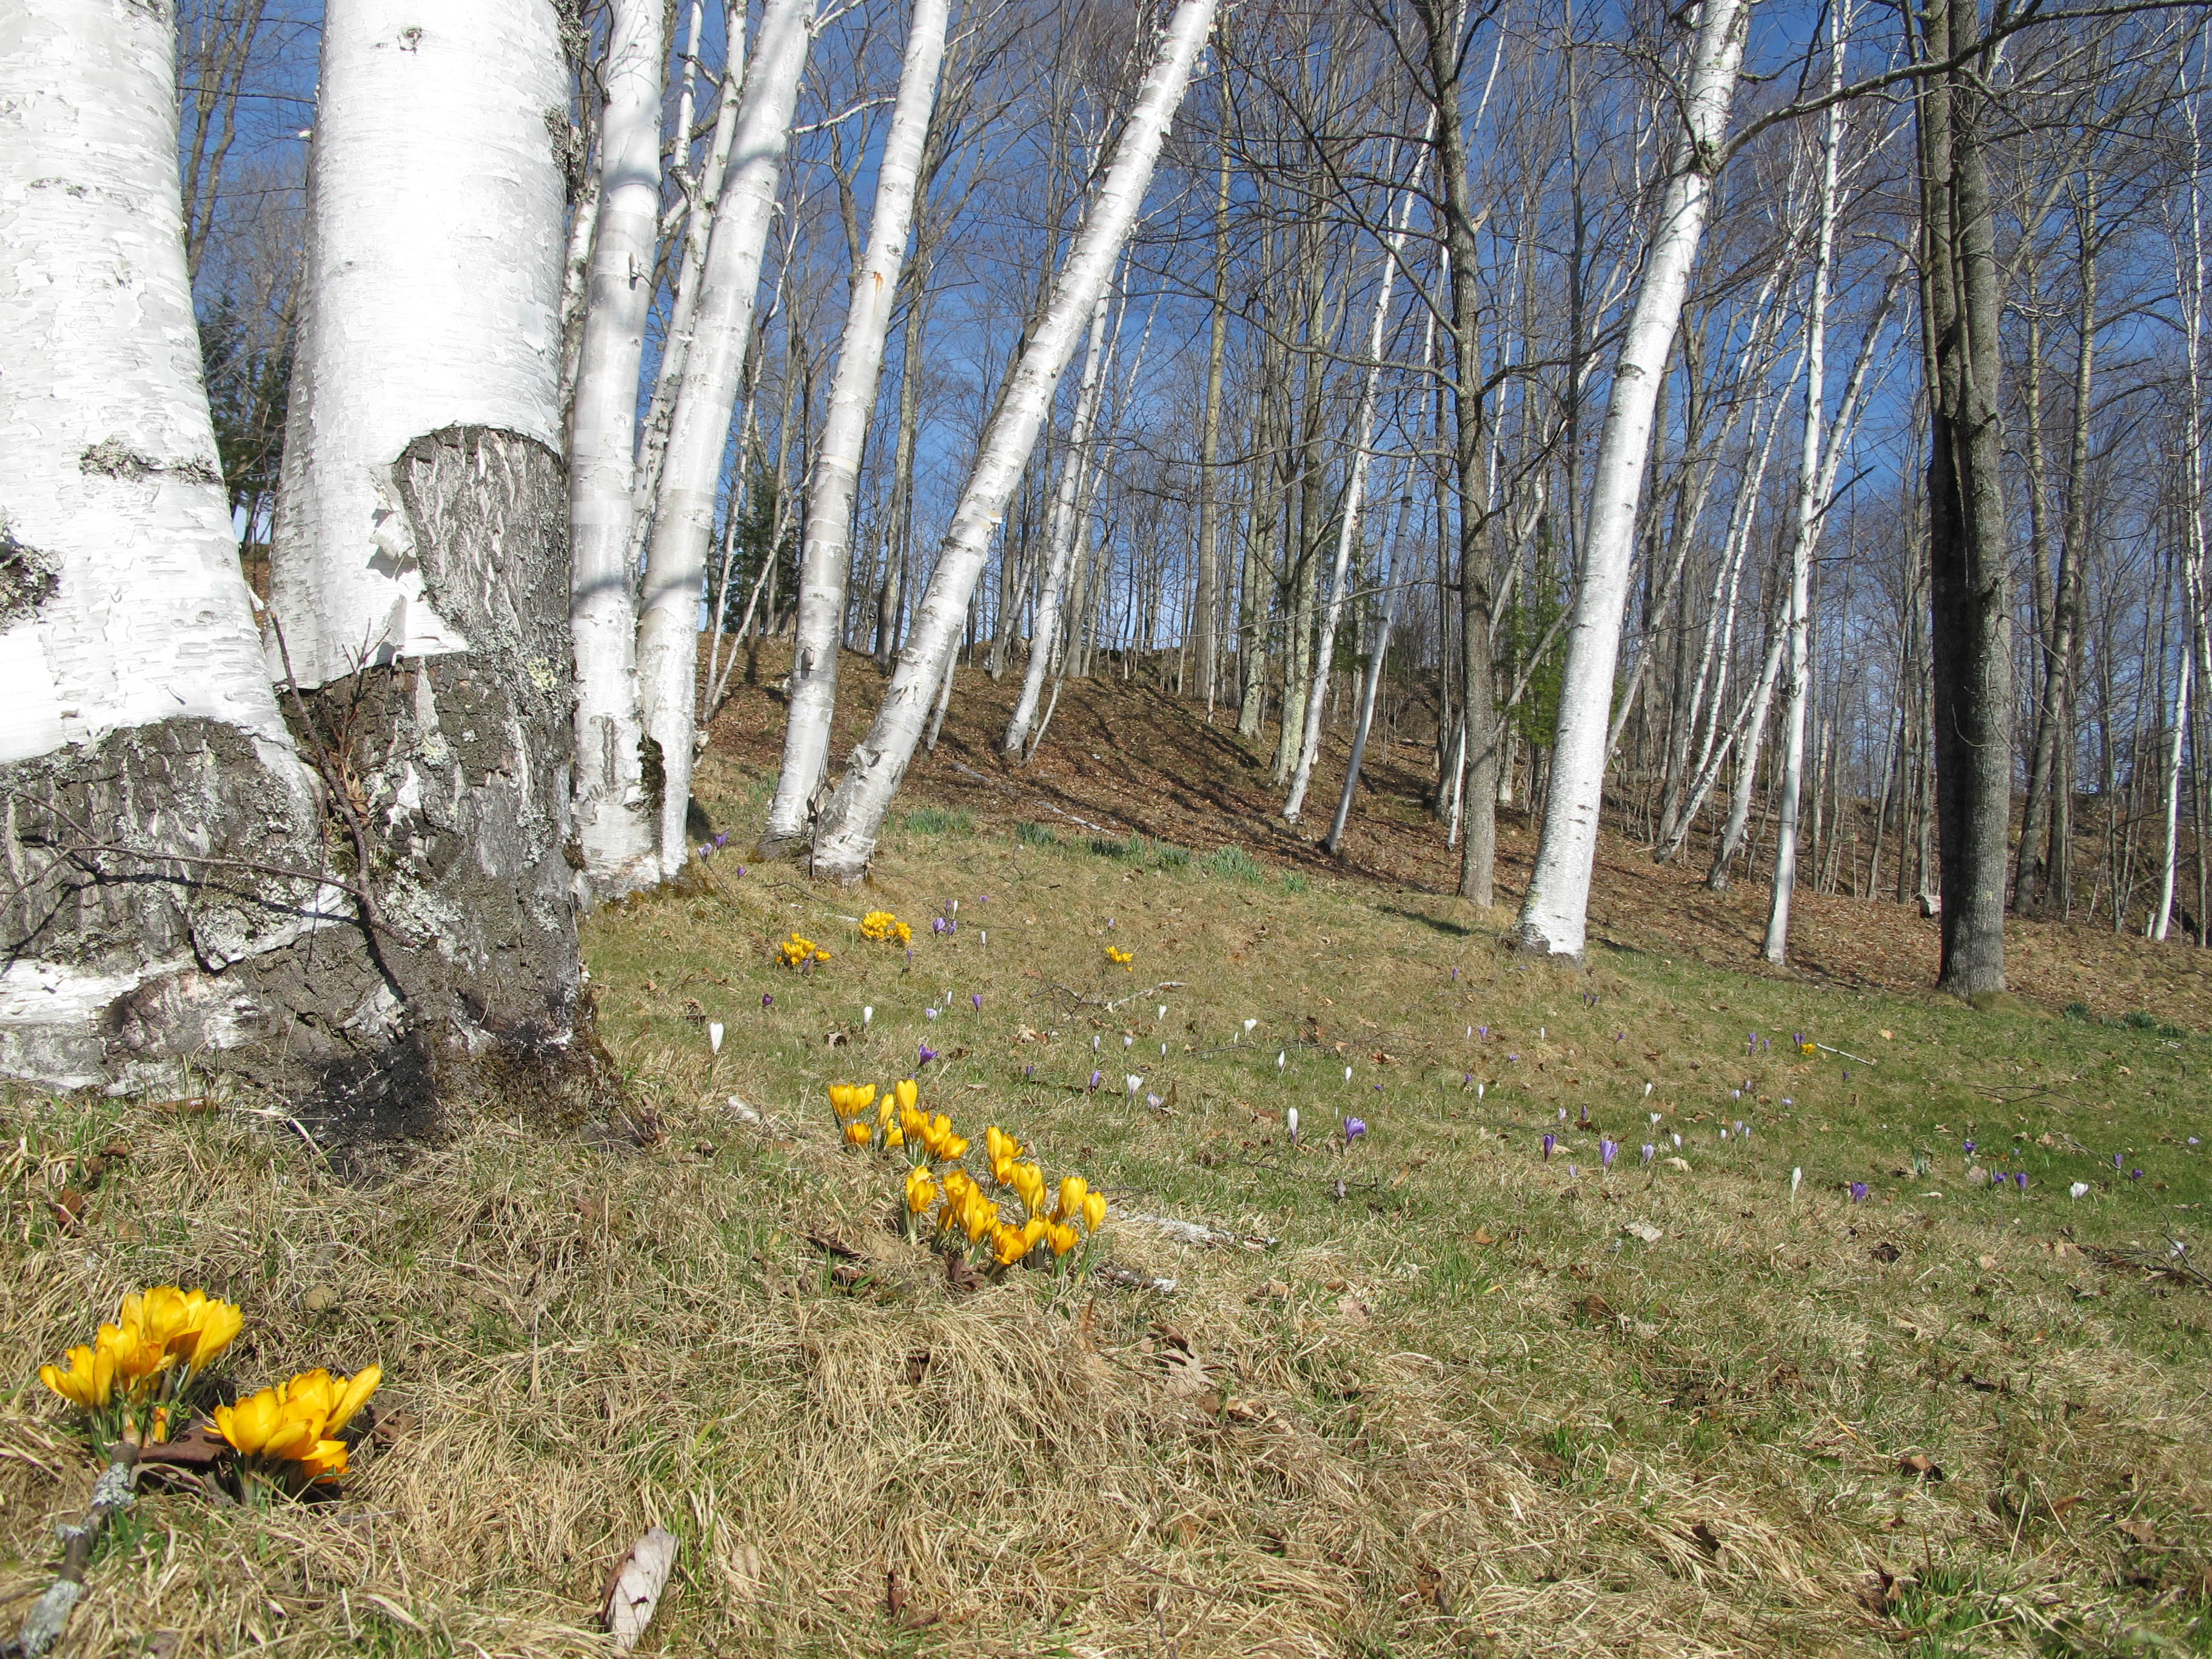 These crocus were lighting up the hillside on April 4, 2010.